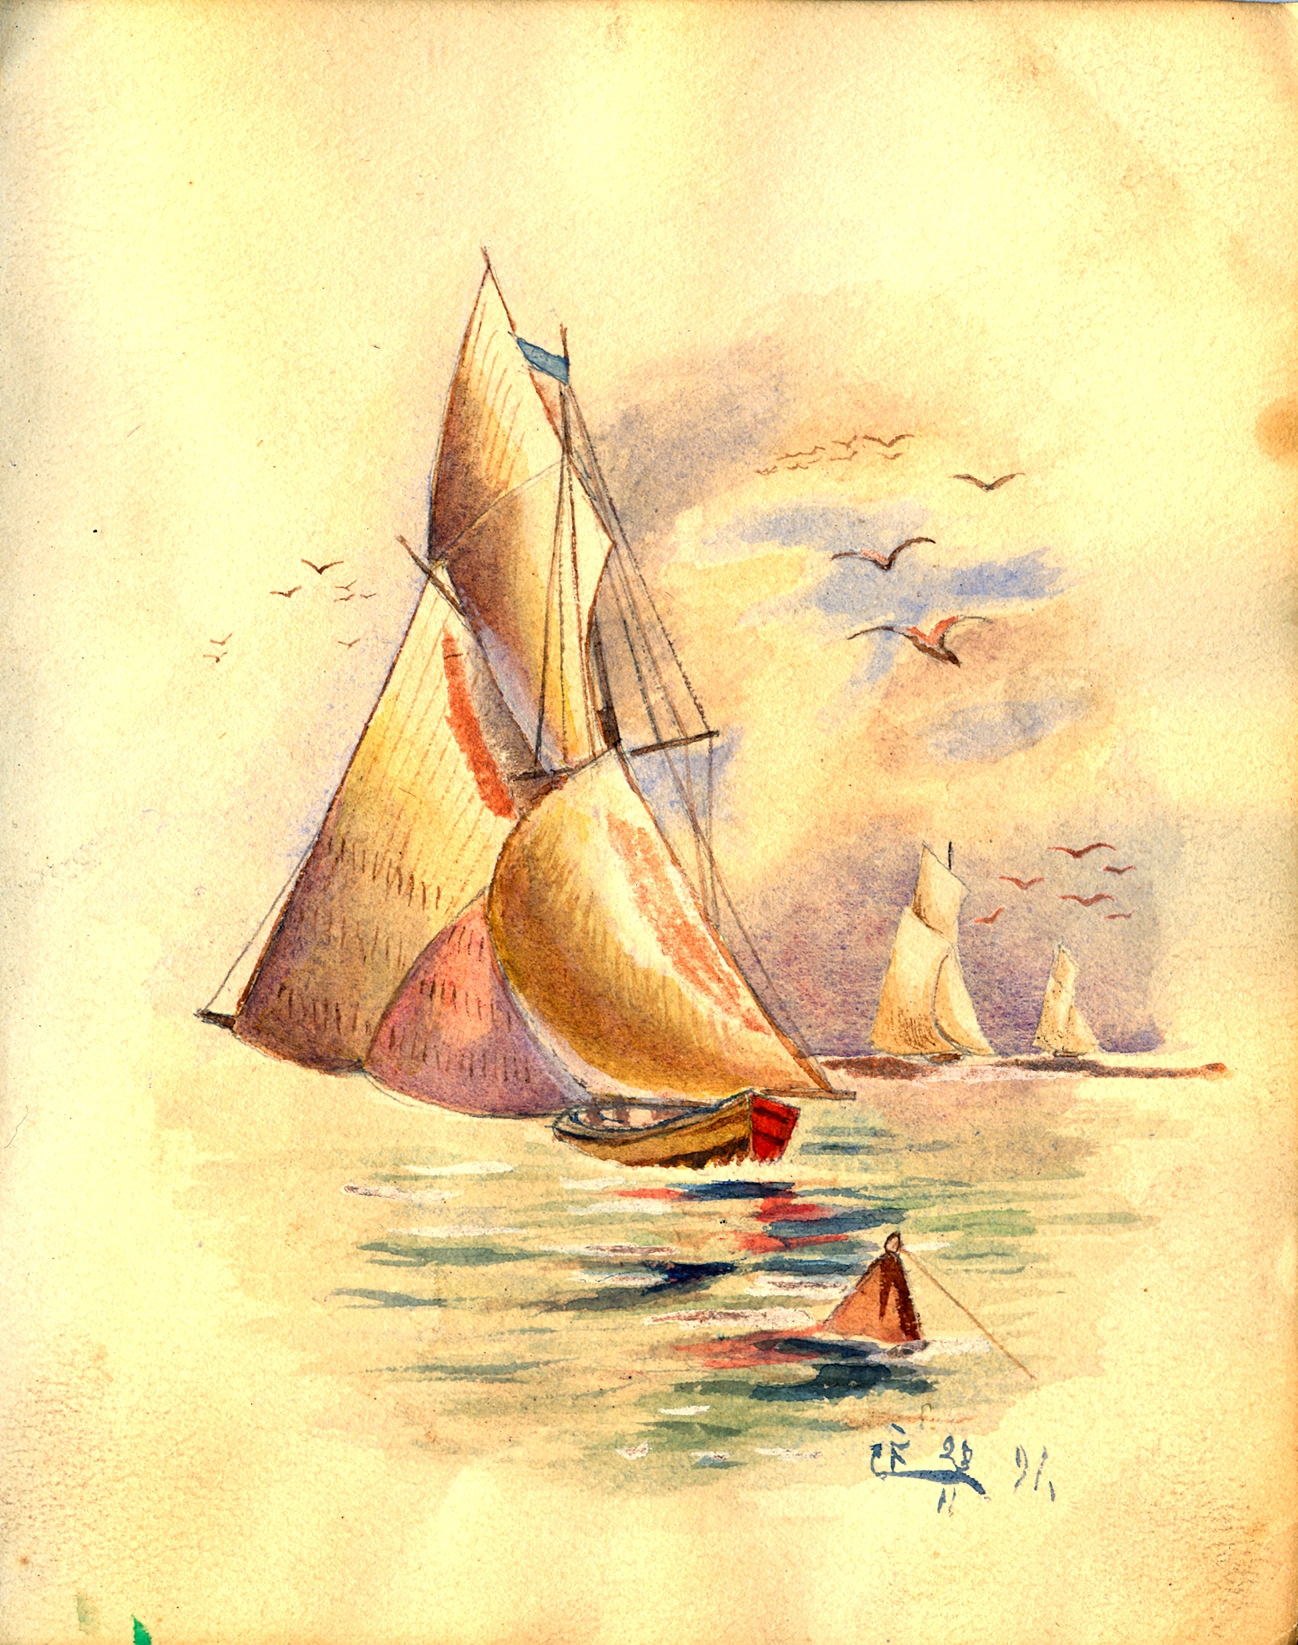 an old fashioned painting of a sailing ship and several small sailboats in the sea